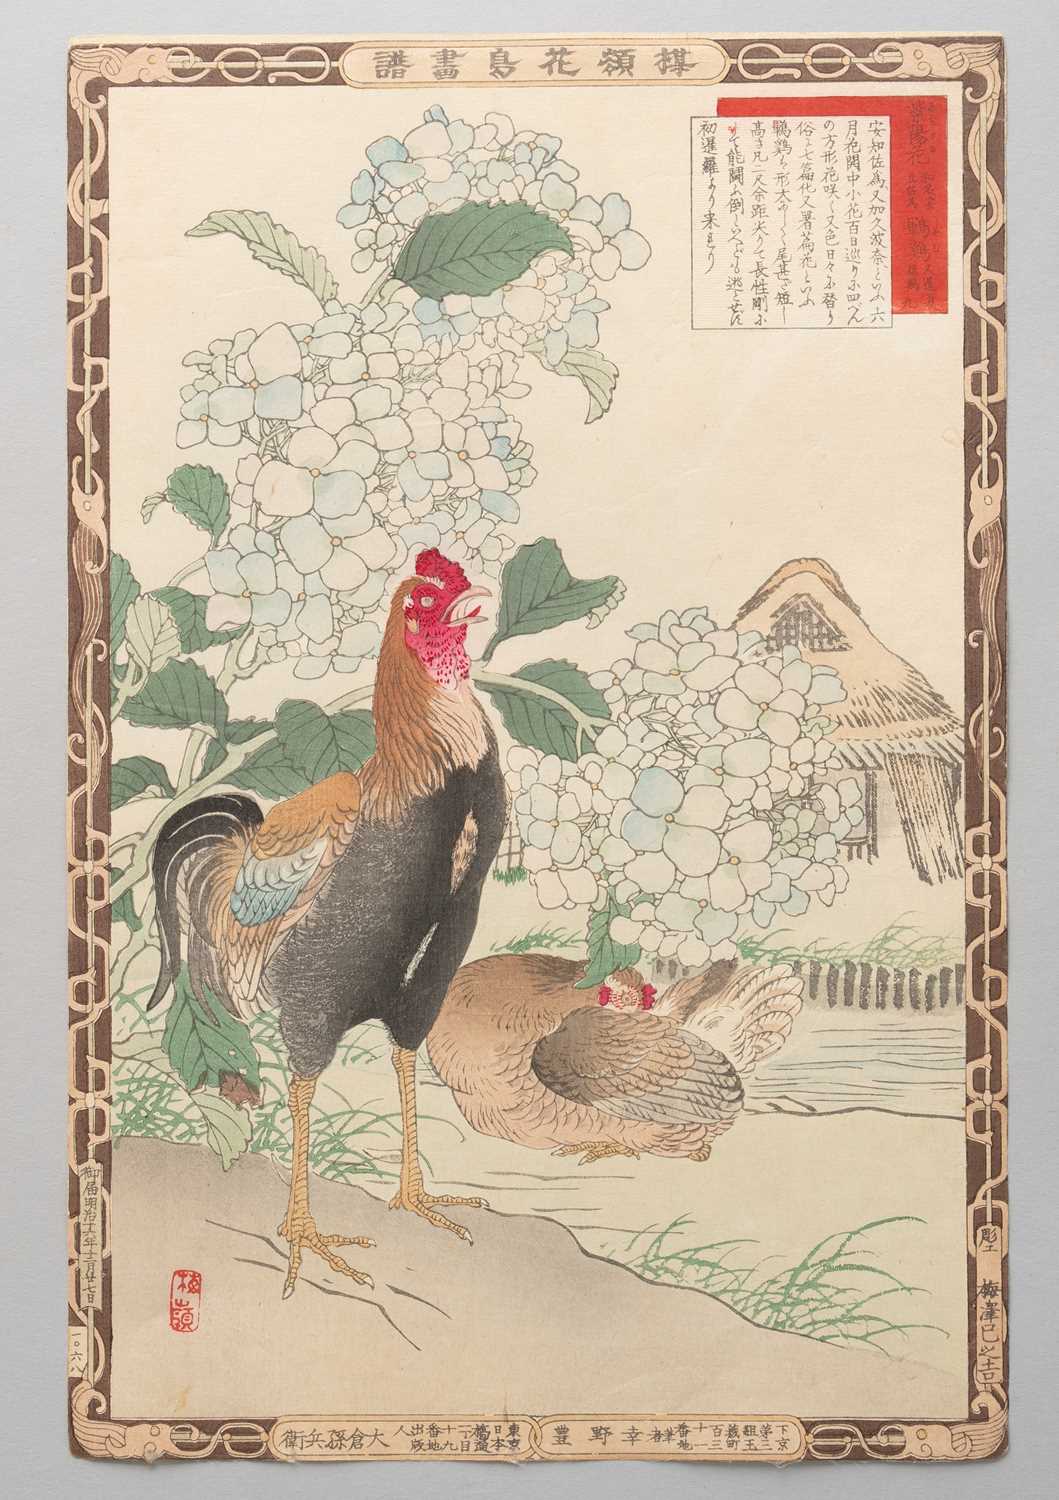 NO RESERVE BAIREI KONO (1844-95) MEIJI ERA, 19TH CENTURY A collection of thirty Japanese woodblock - Image 15 of 30